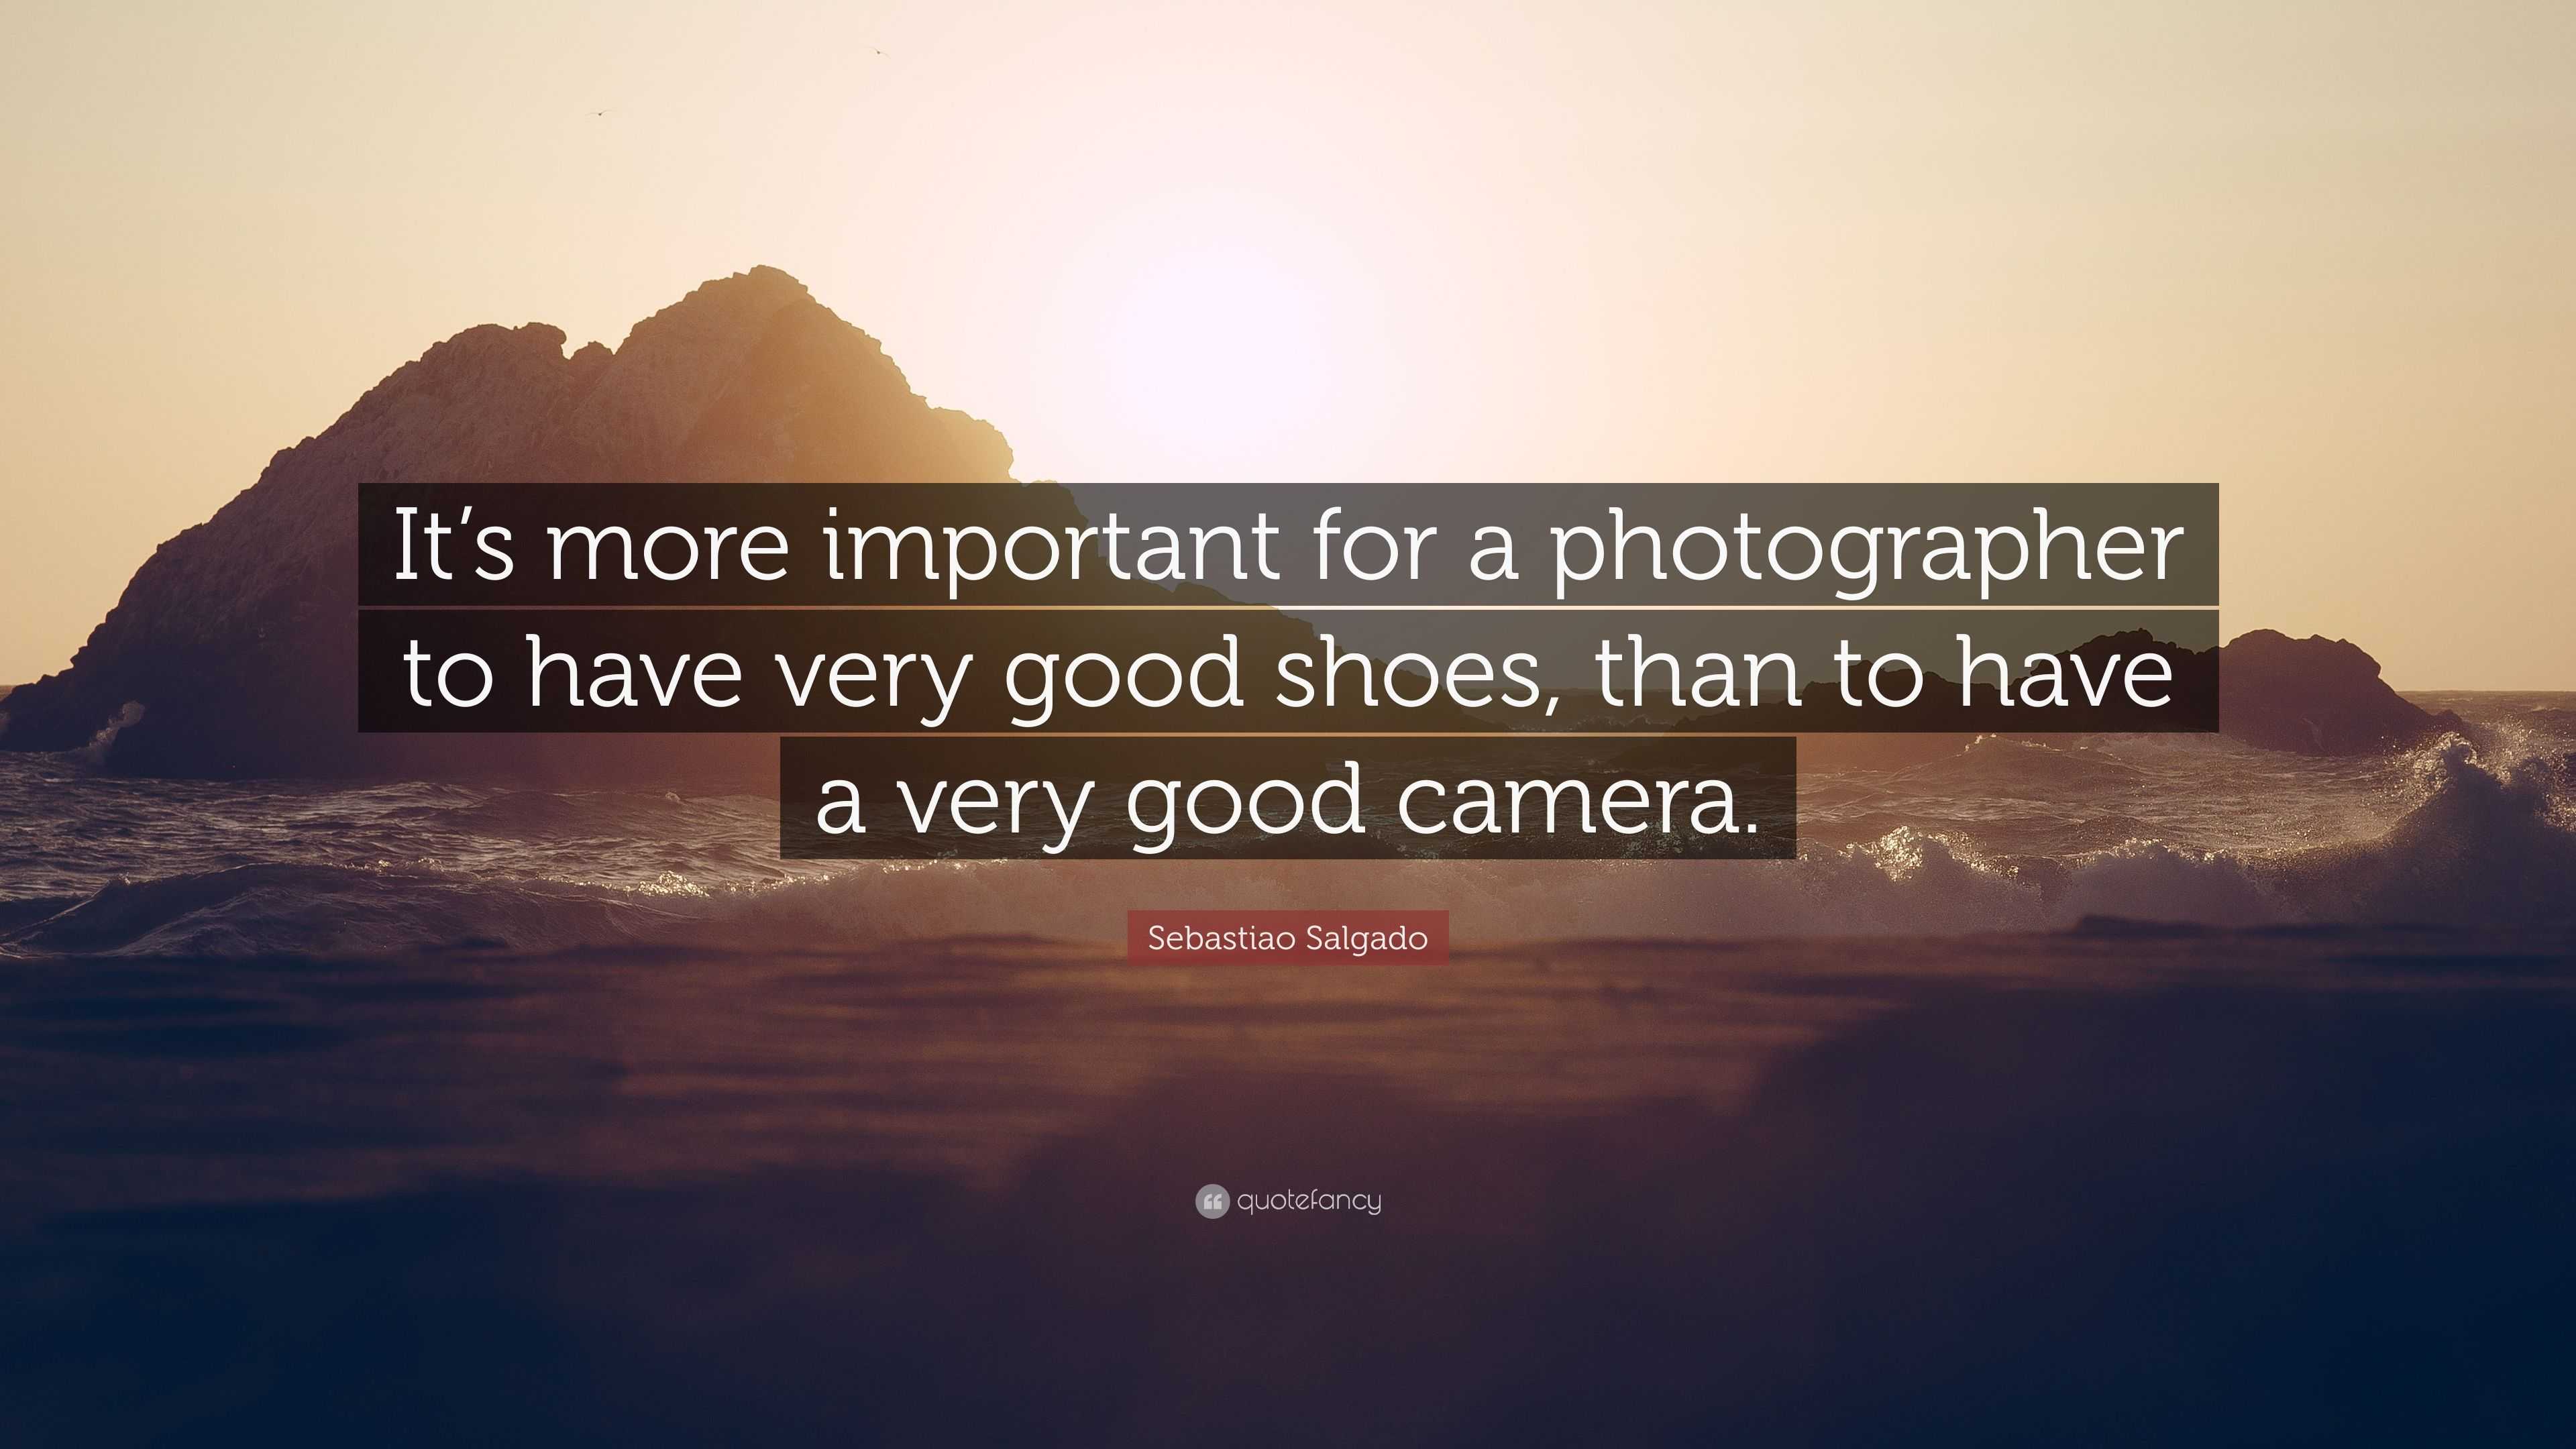 Sebastiao Salgado Quote: “It’s more important for a photographer to ...